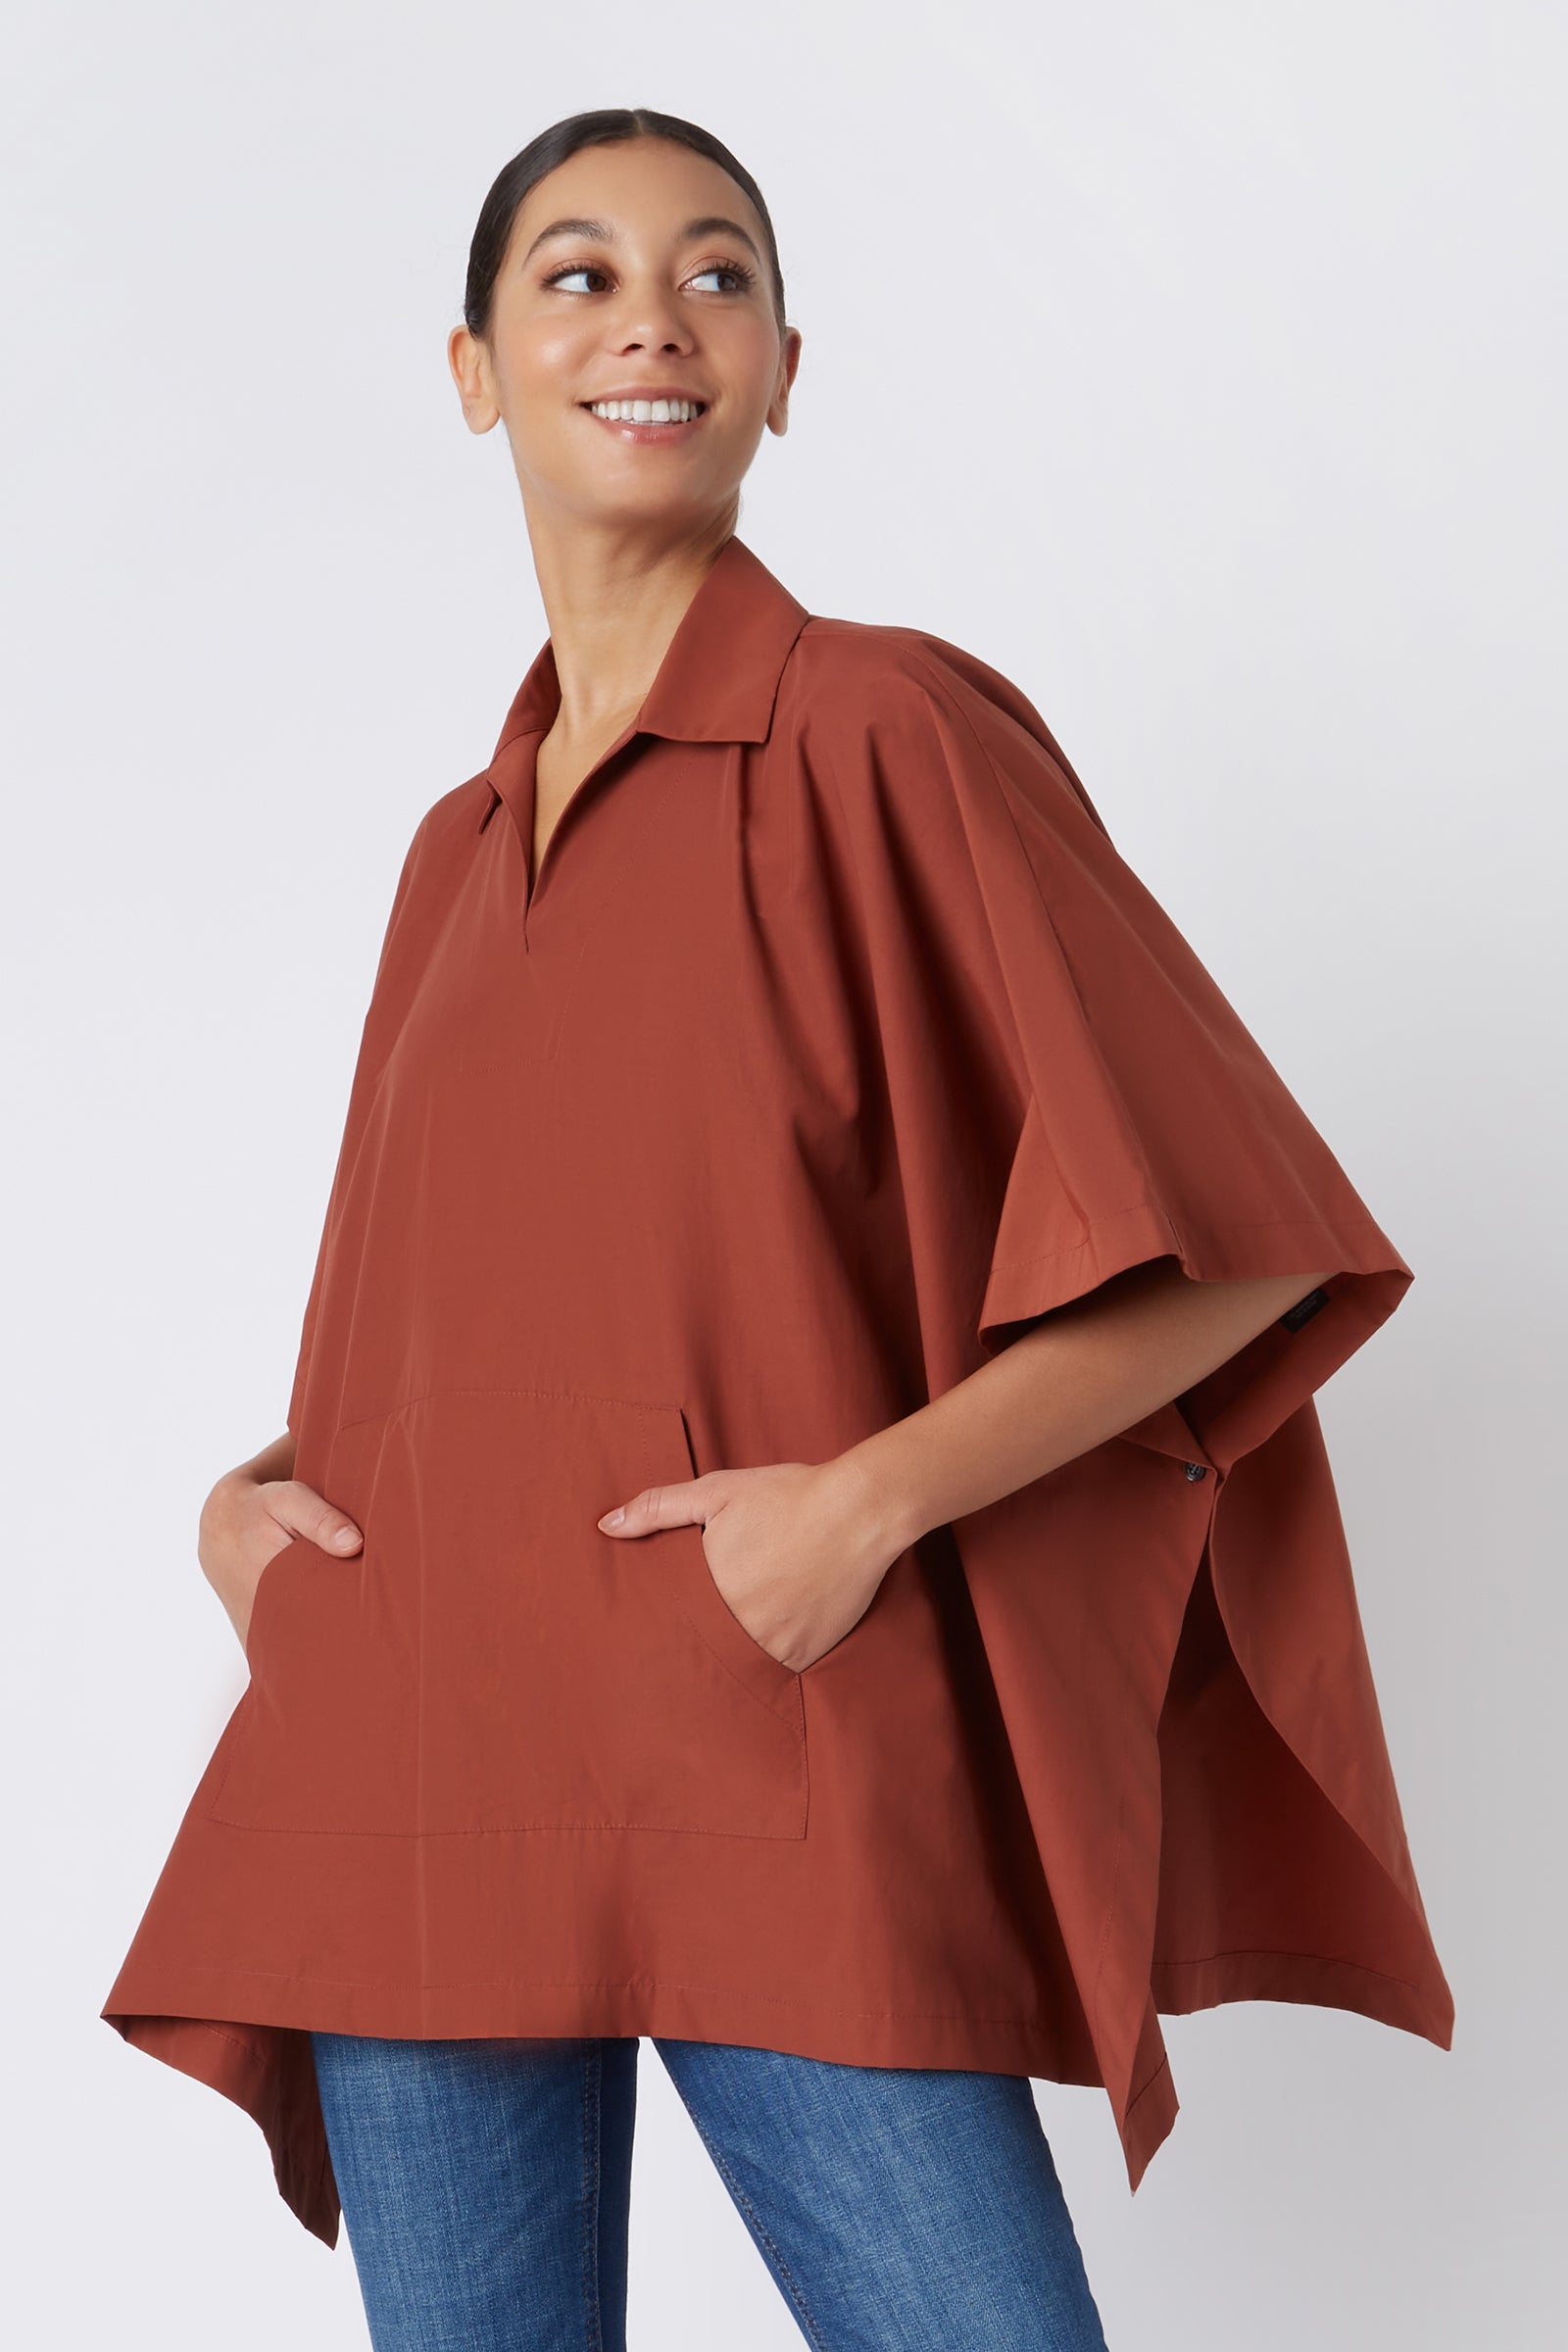 Kal Rieman Pocket Poncho in Rust Italian Broadcloth on Model with Hands in Pockets Cropped Front View